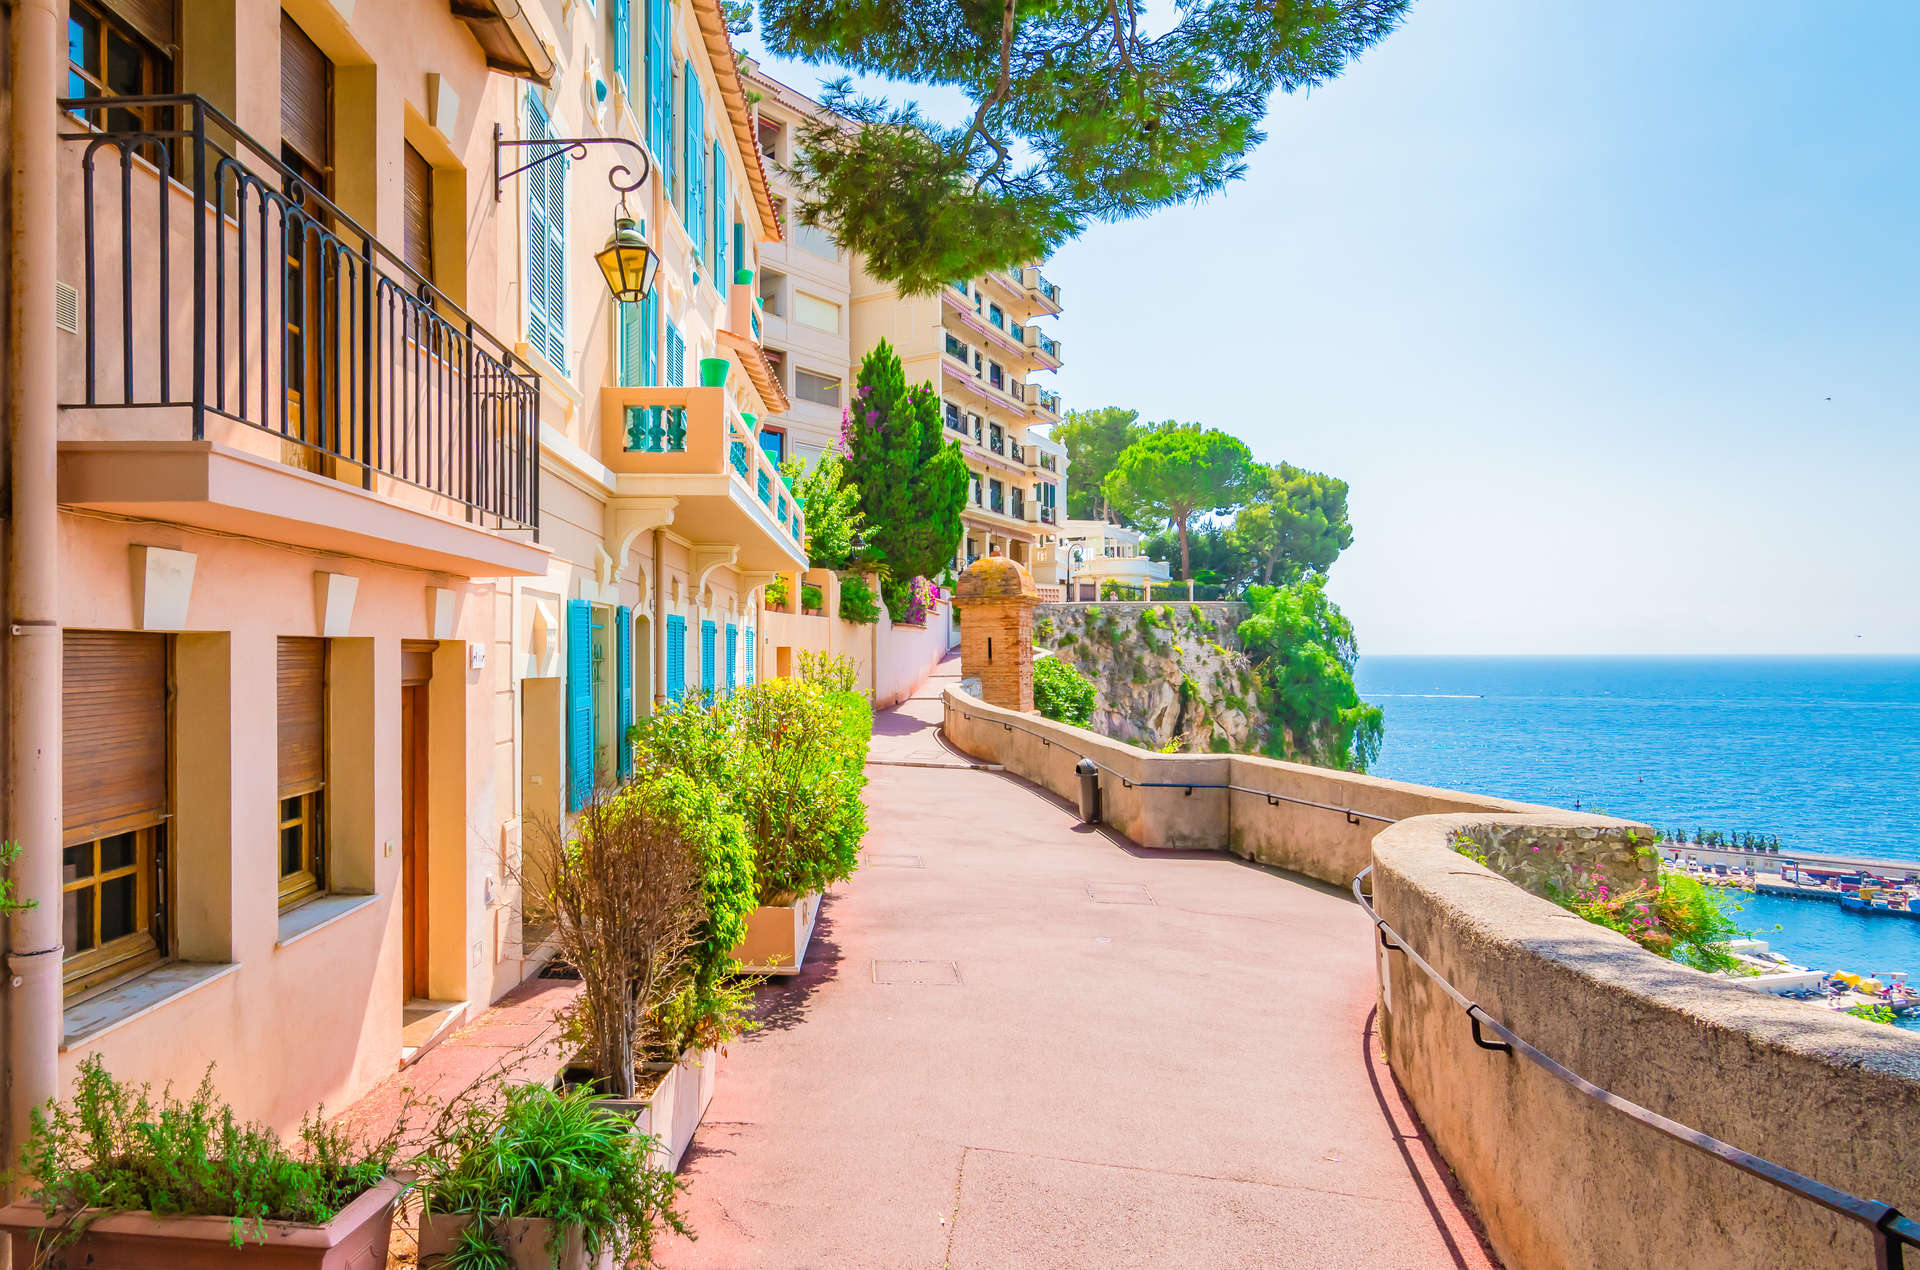 A stroll along the waterfront of Monaco brings you to many delightful corners